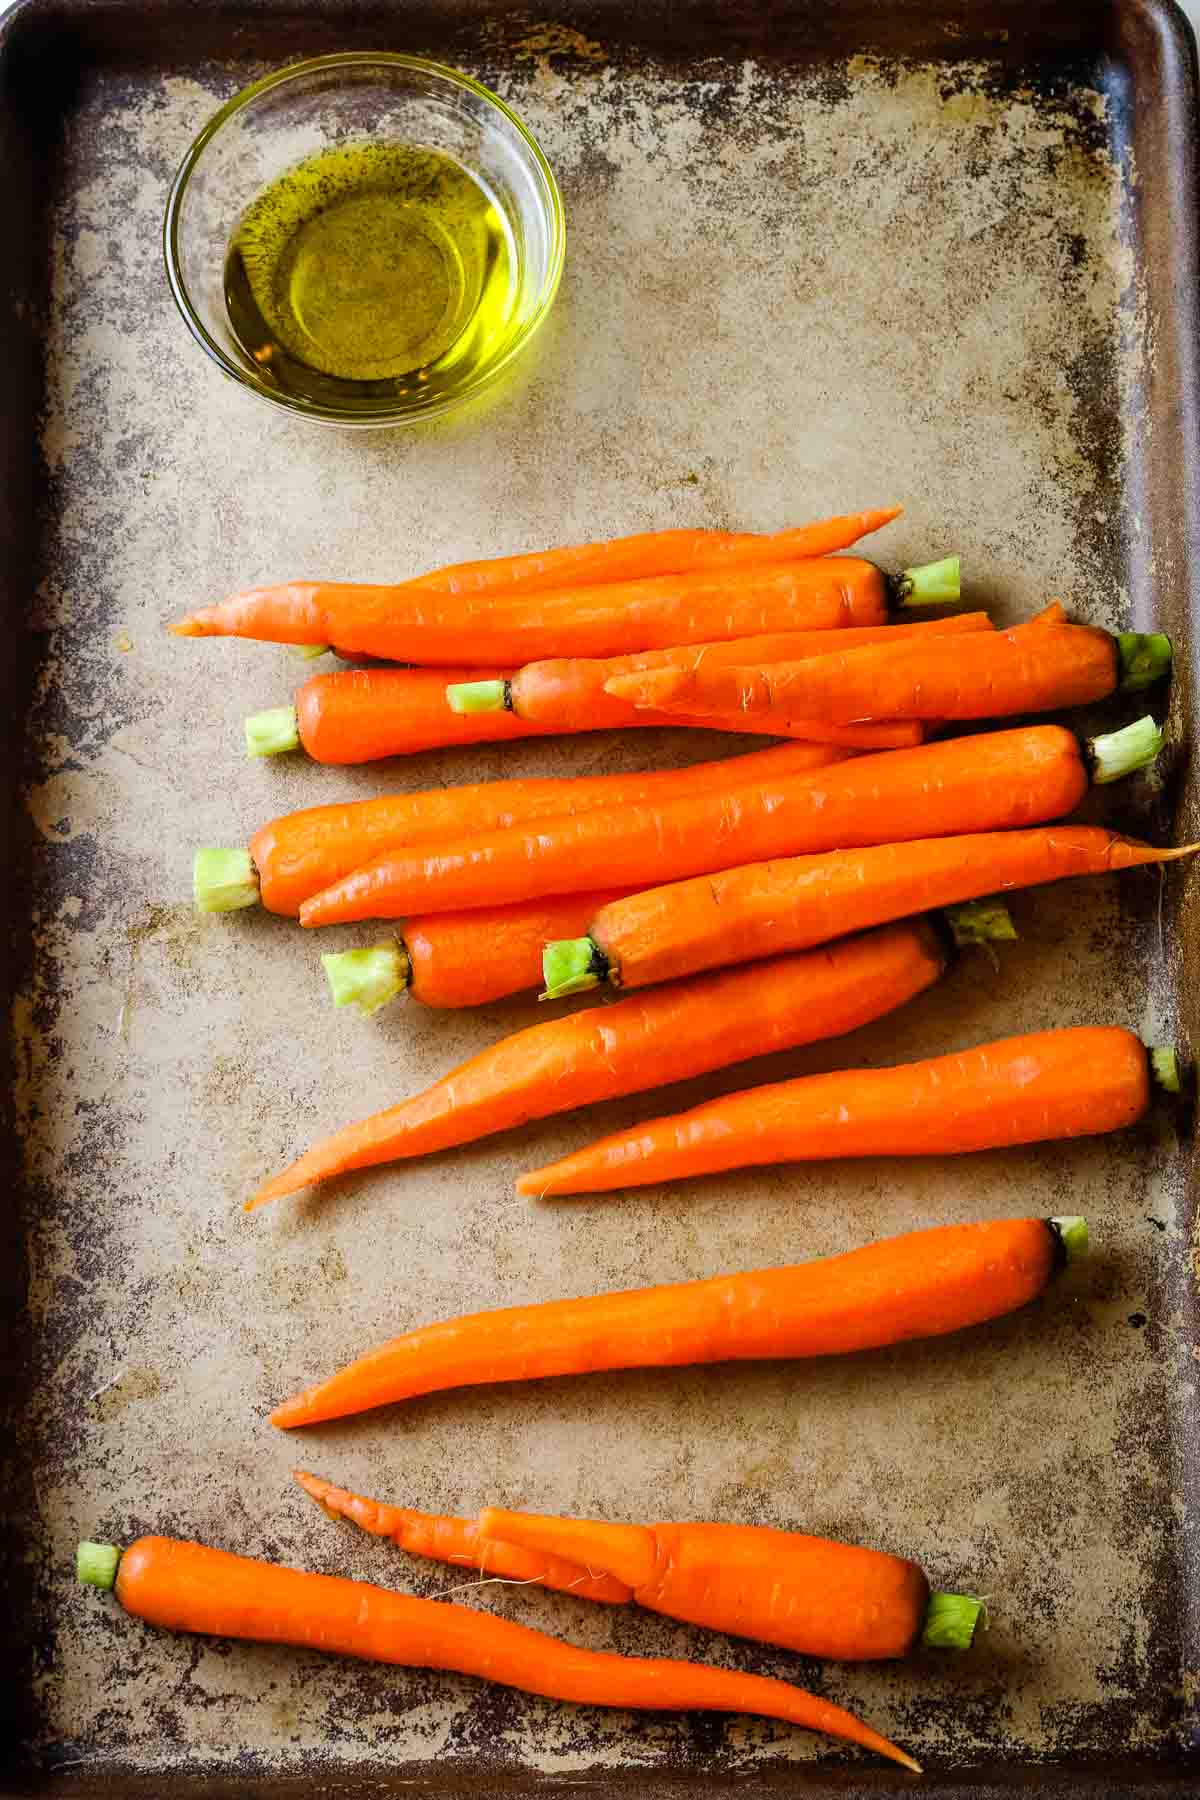 trimmed carrots on sheet with oil.